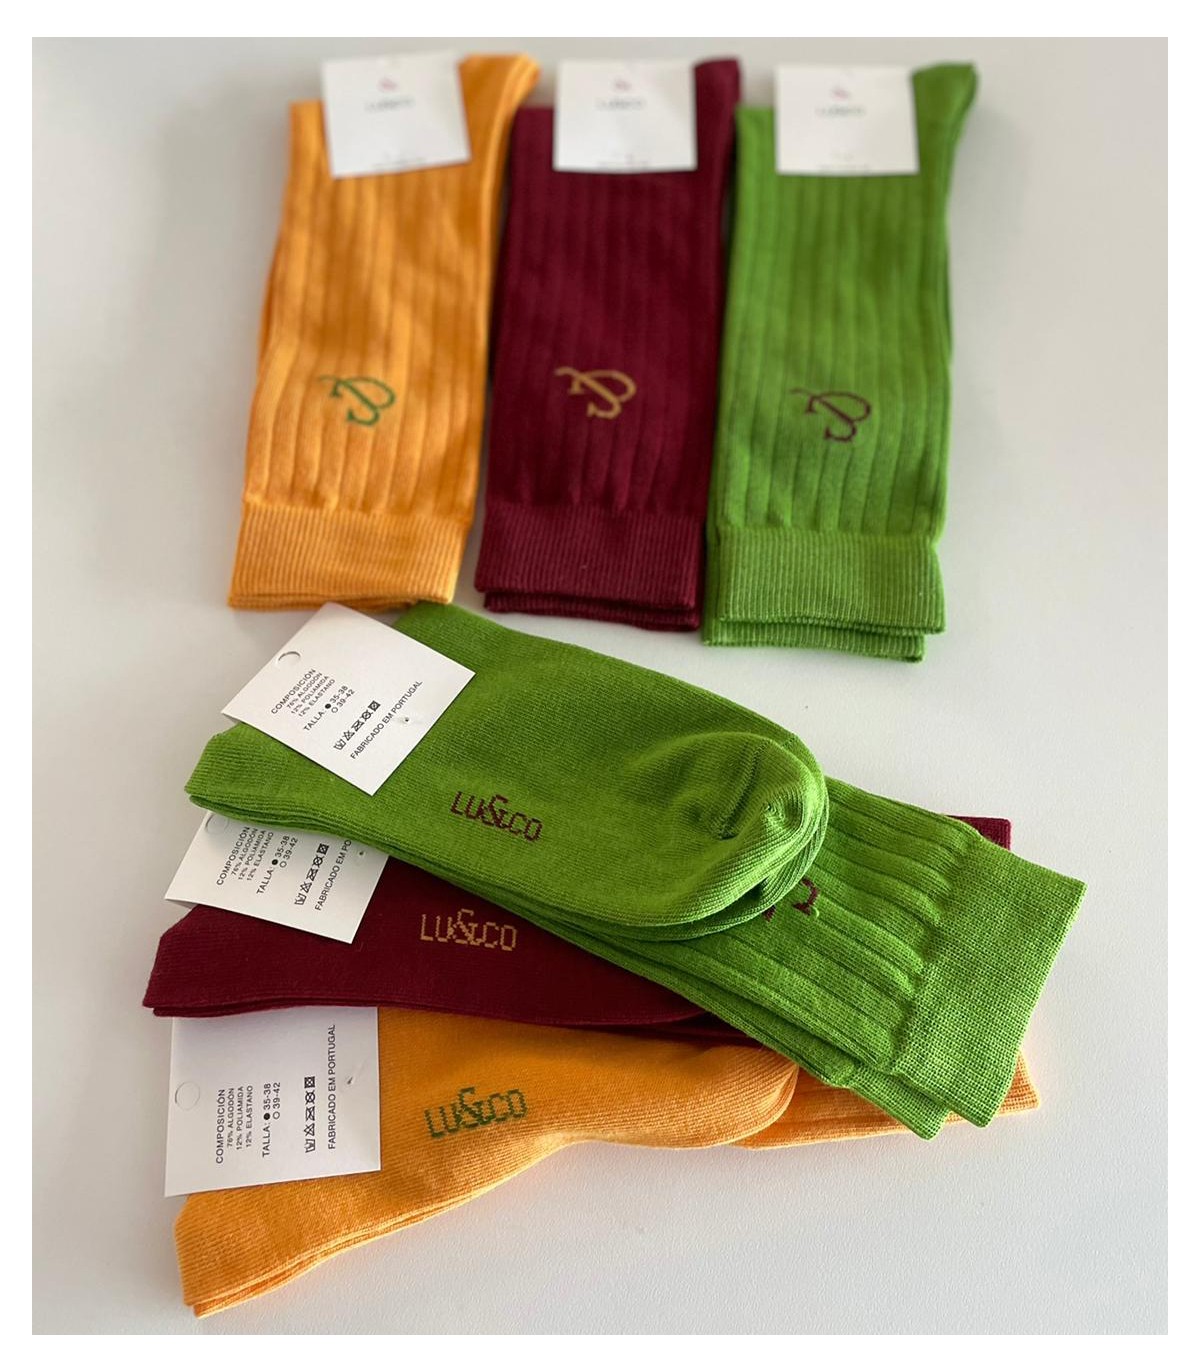 Pack 3 calcetines mujer ositos Green Cotton